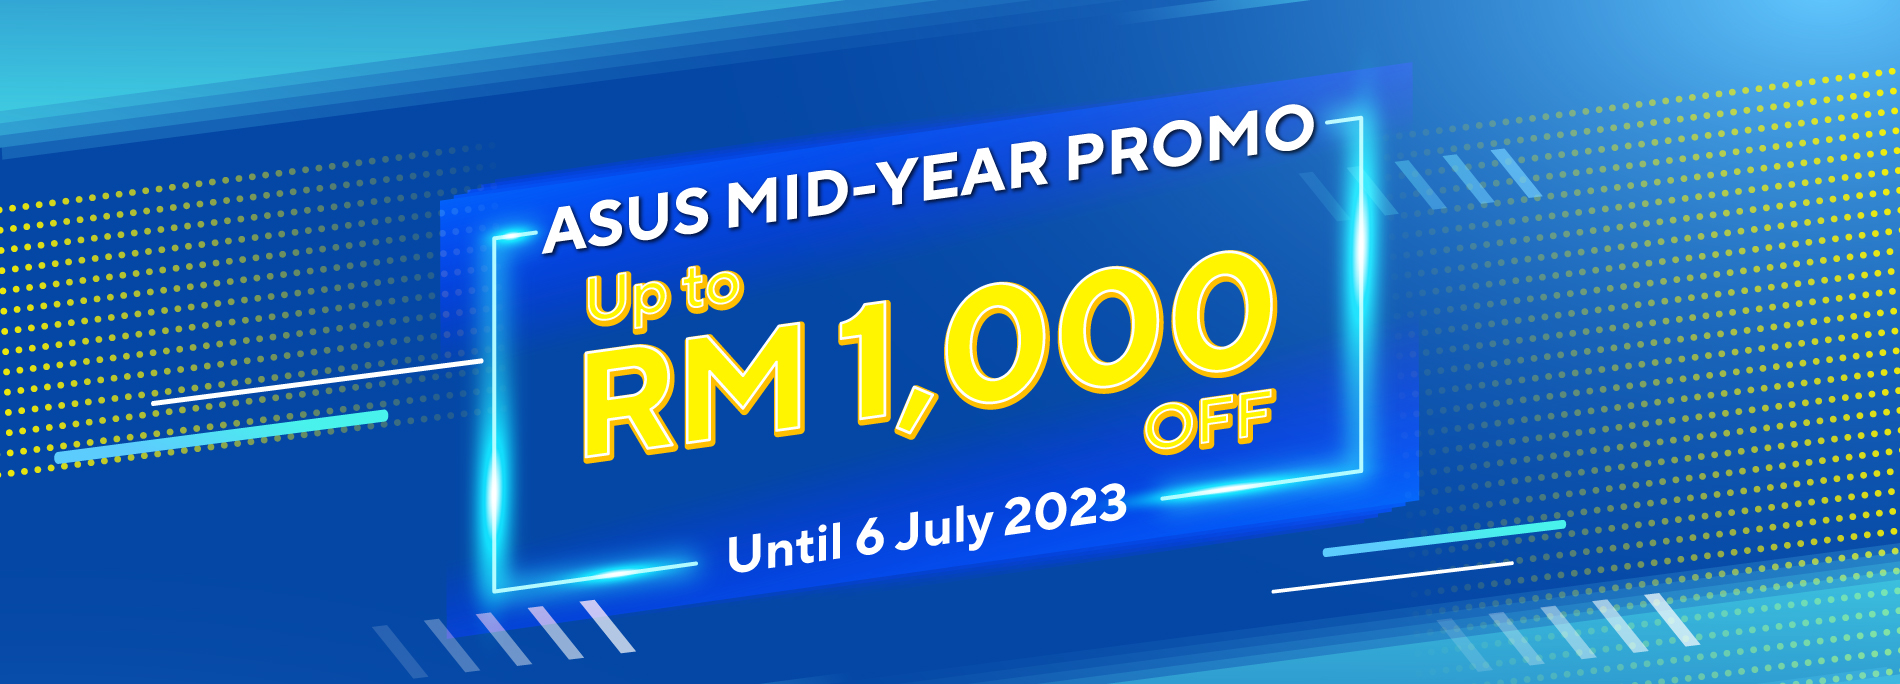 ASUS Mid-Year Promo